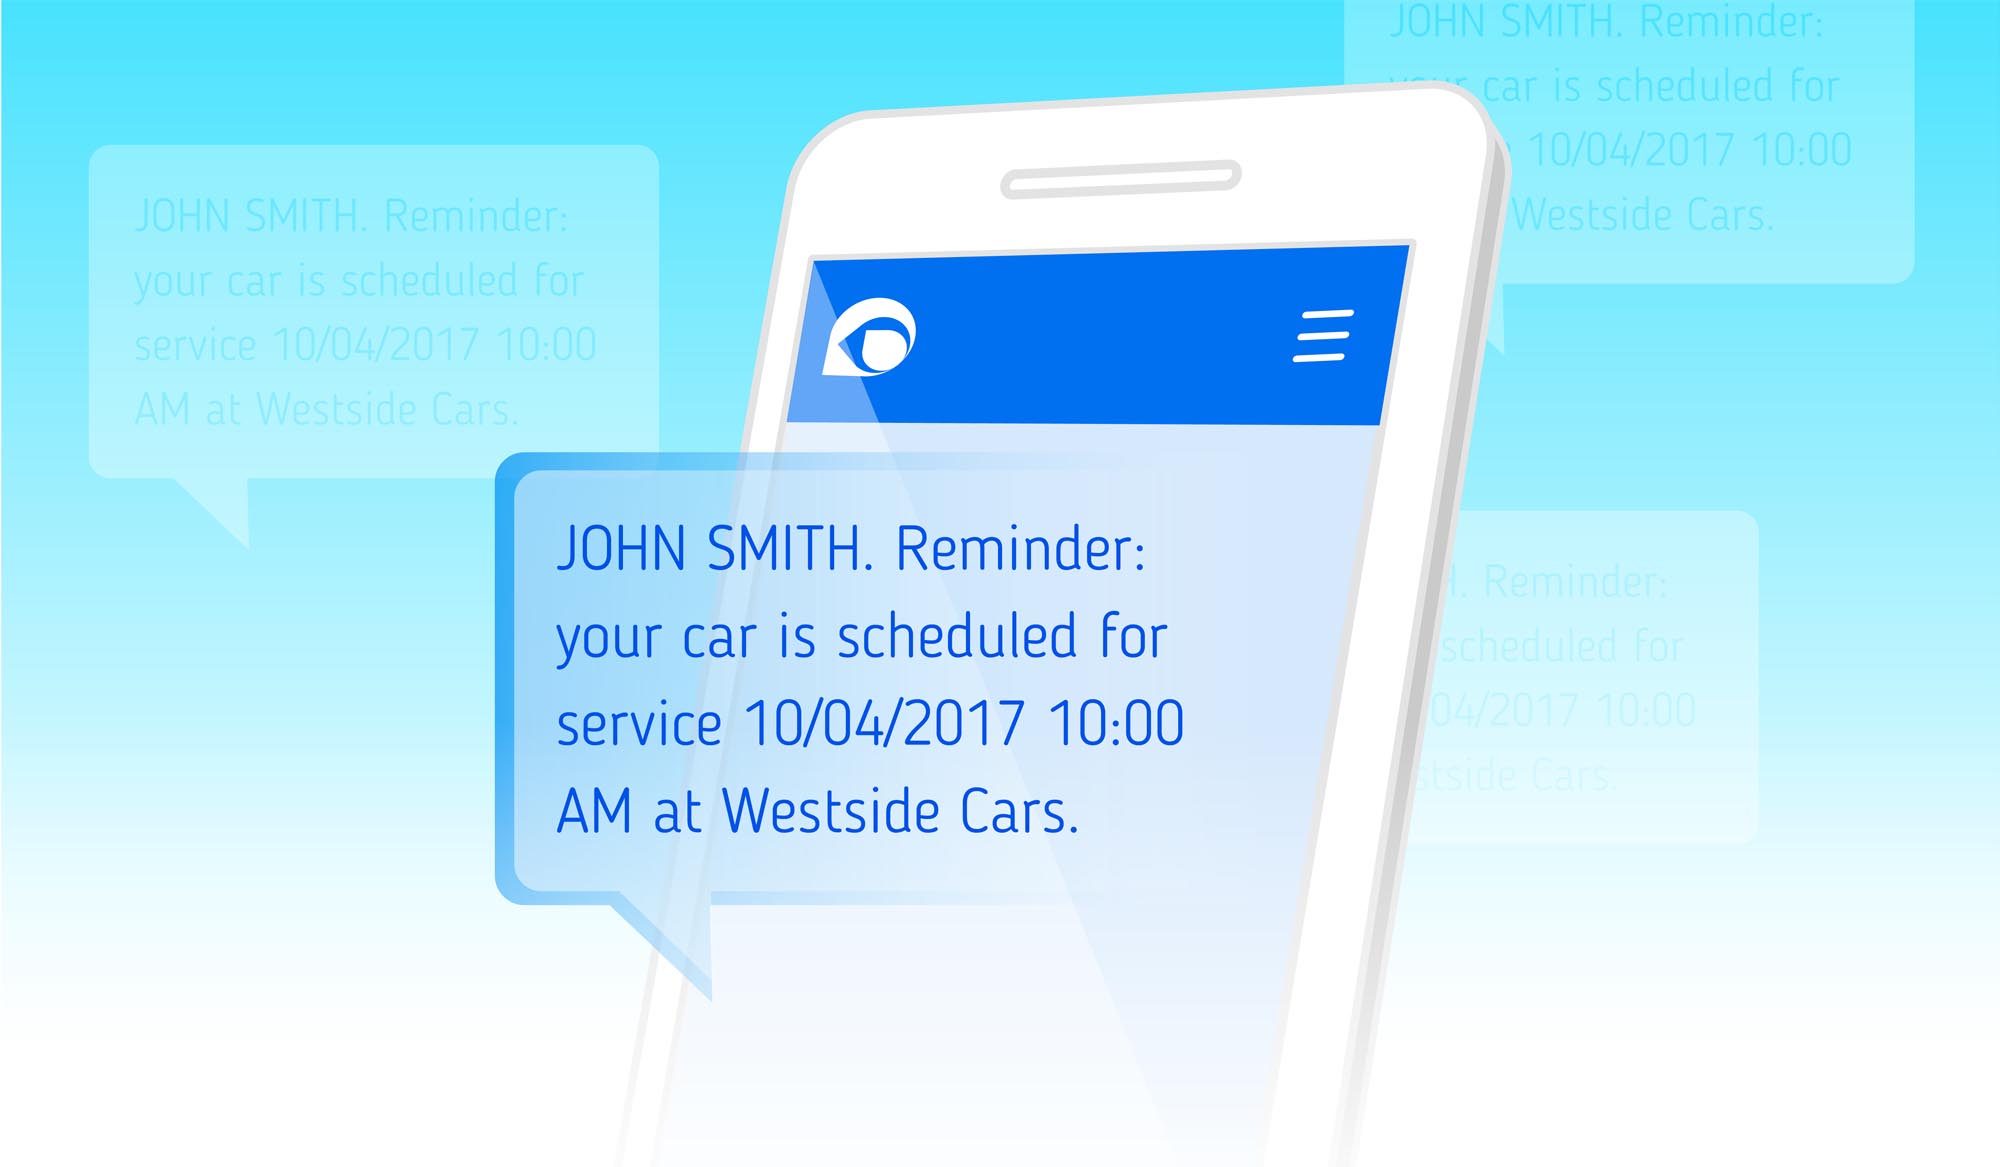 SMS reminder on phone screen